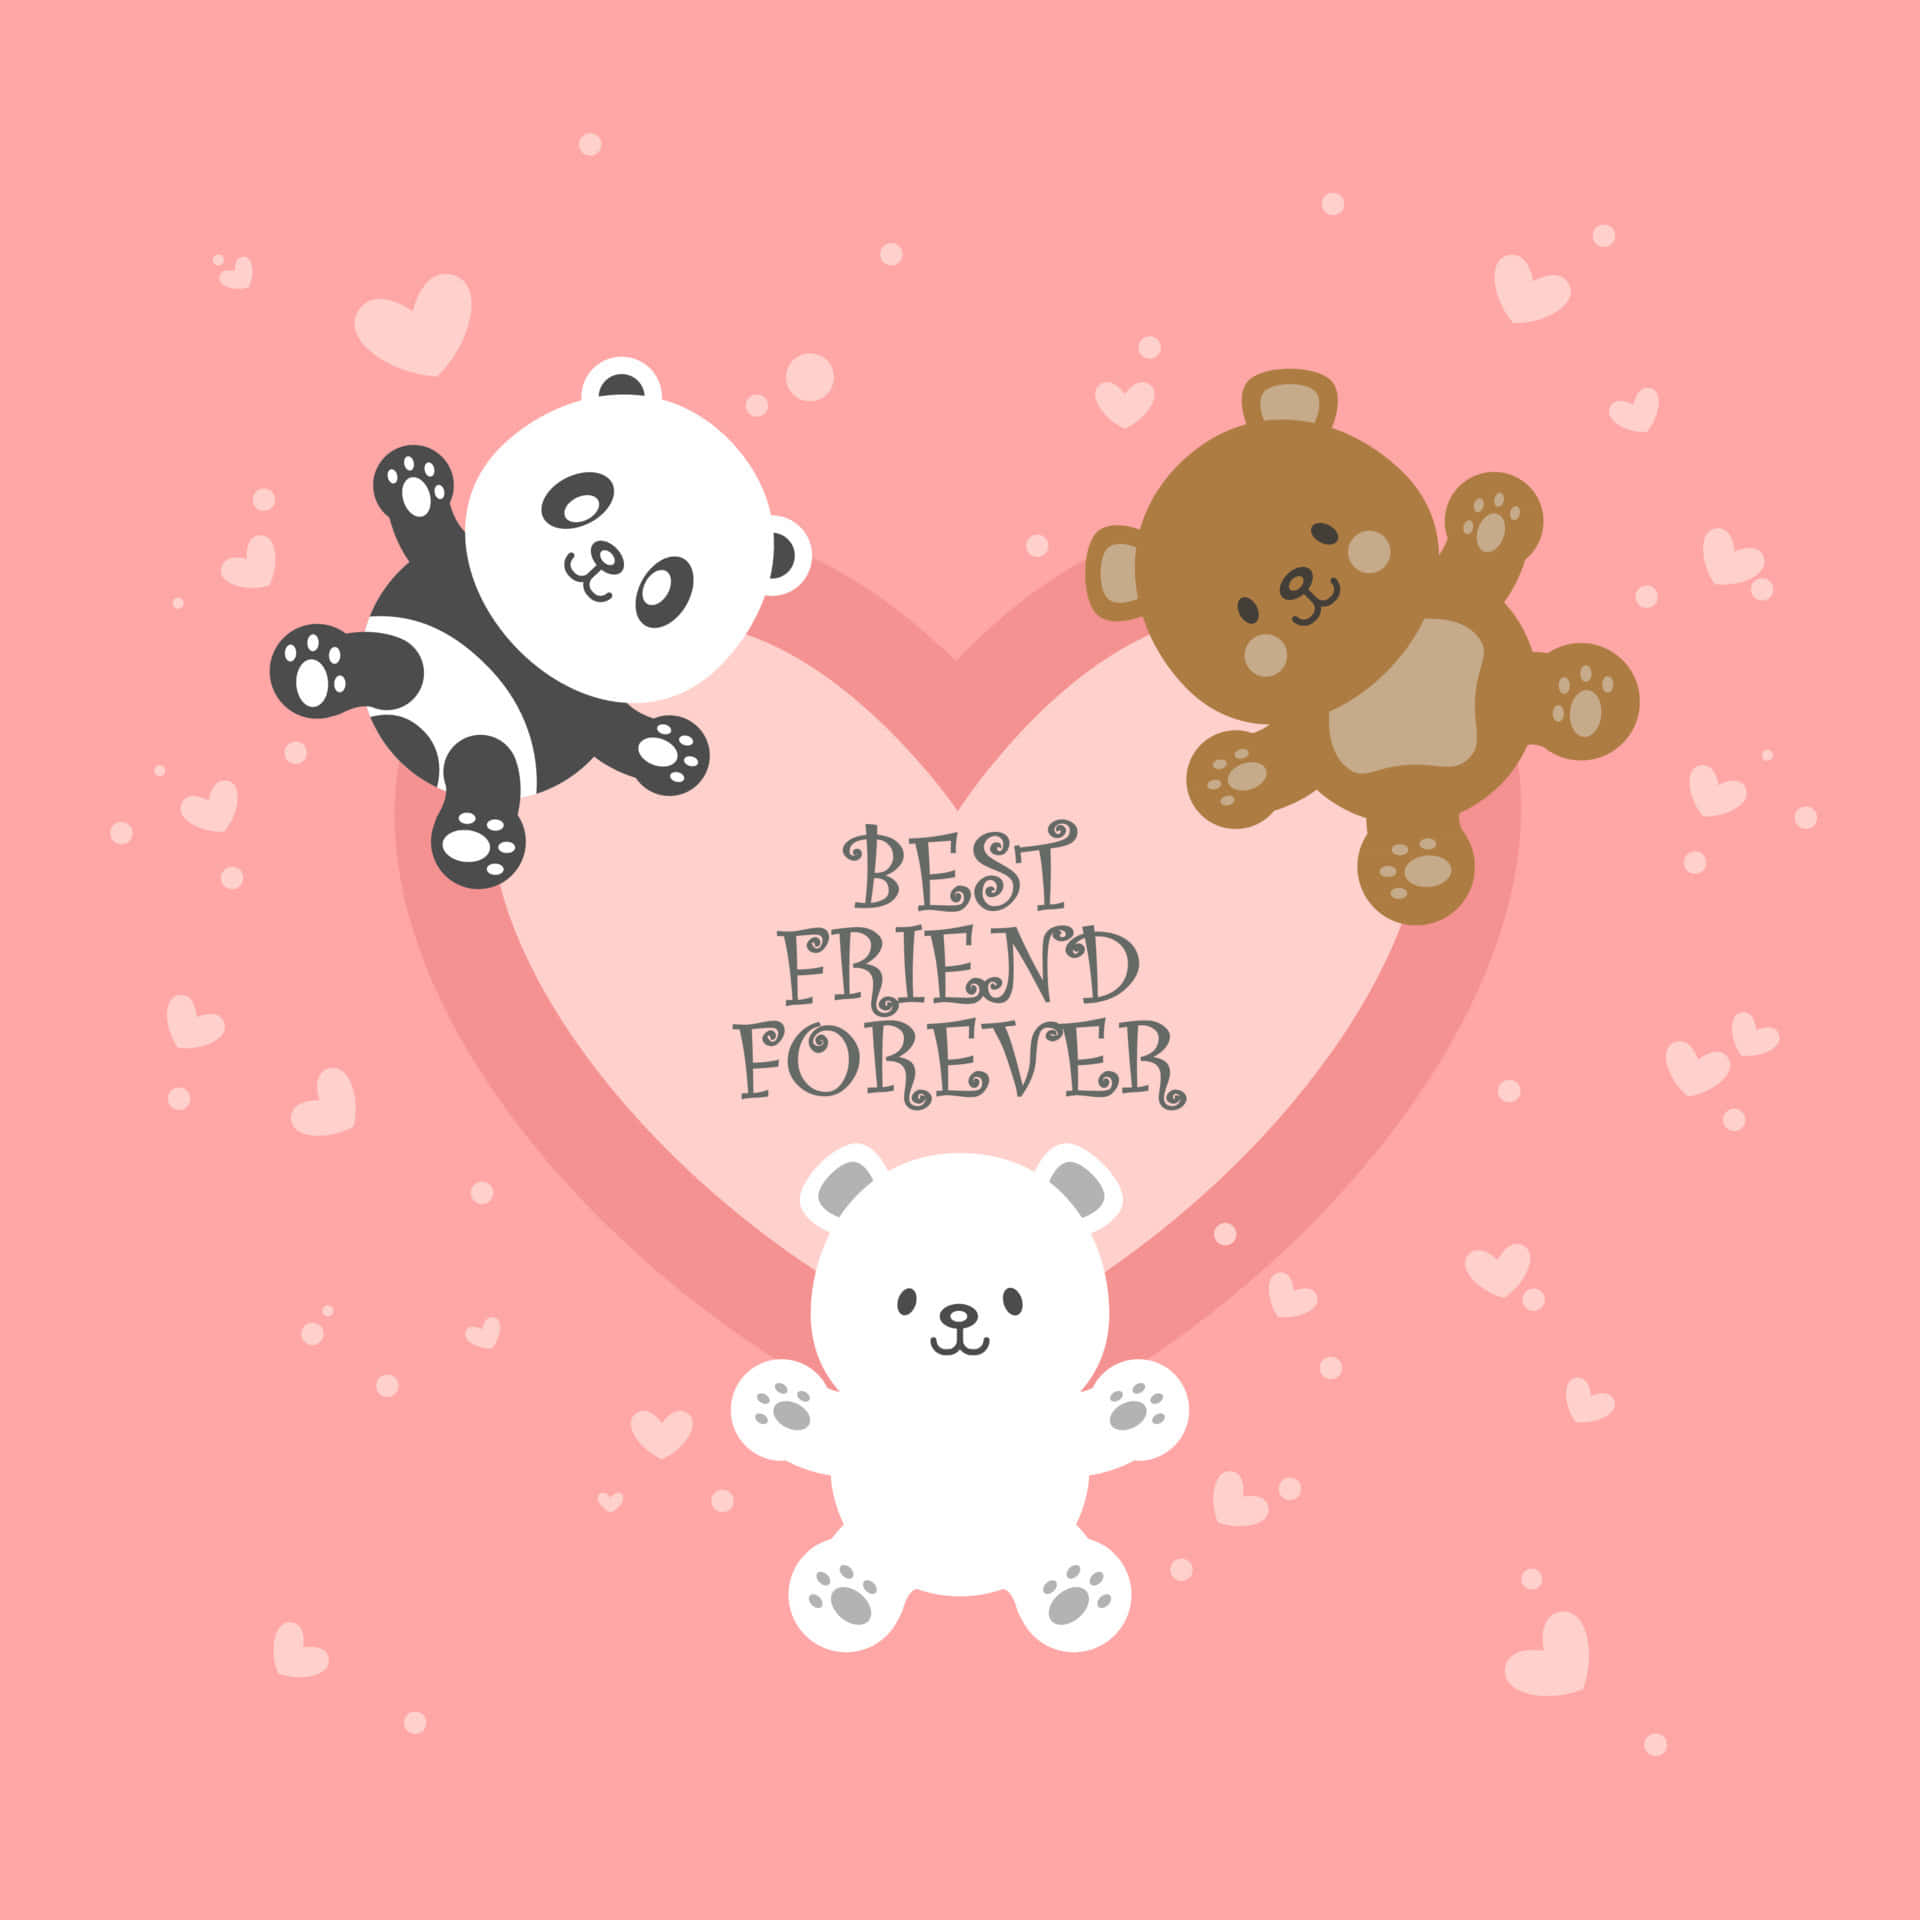 Celebrate your bond with your best friend with this beautiful kawaii art! Wallpaper